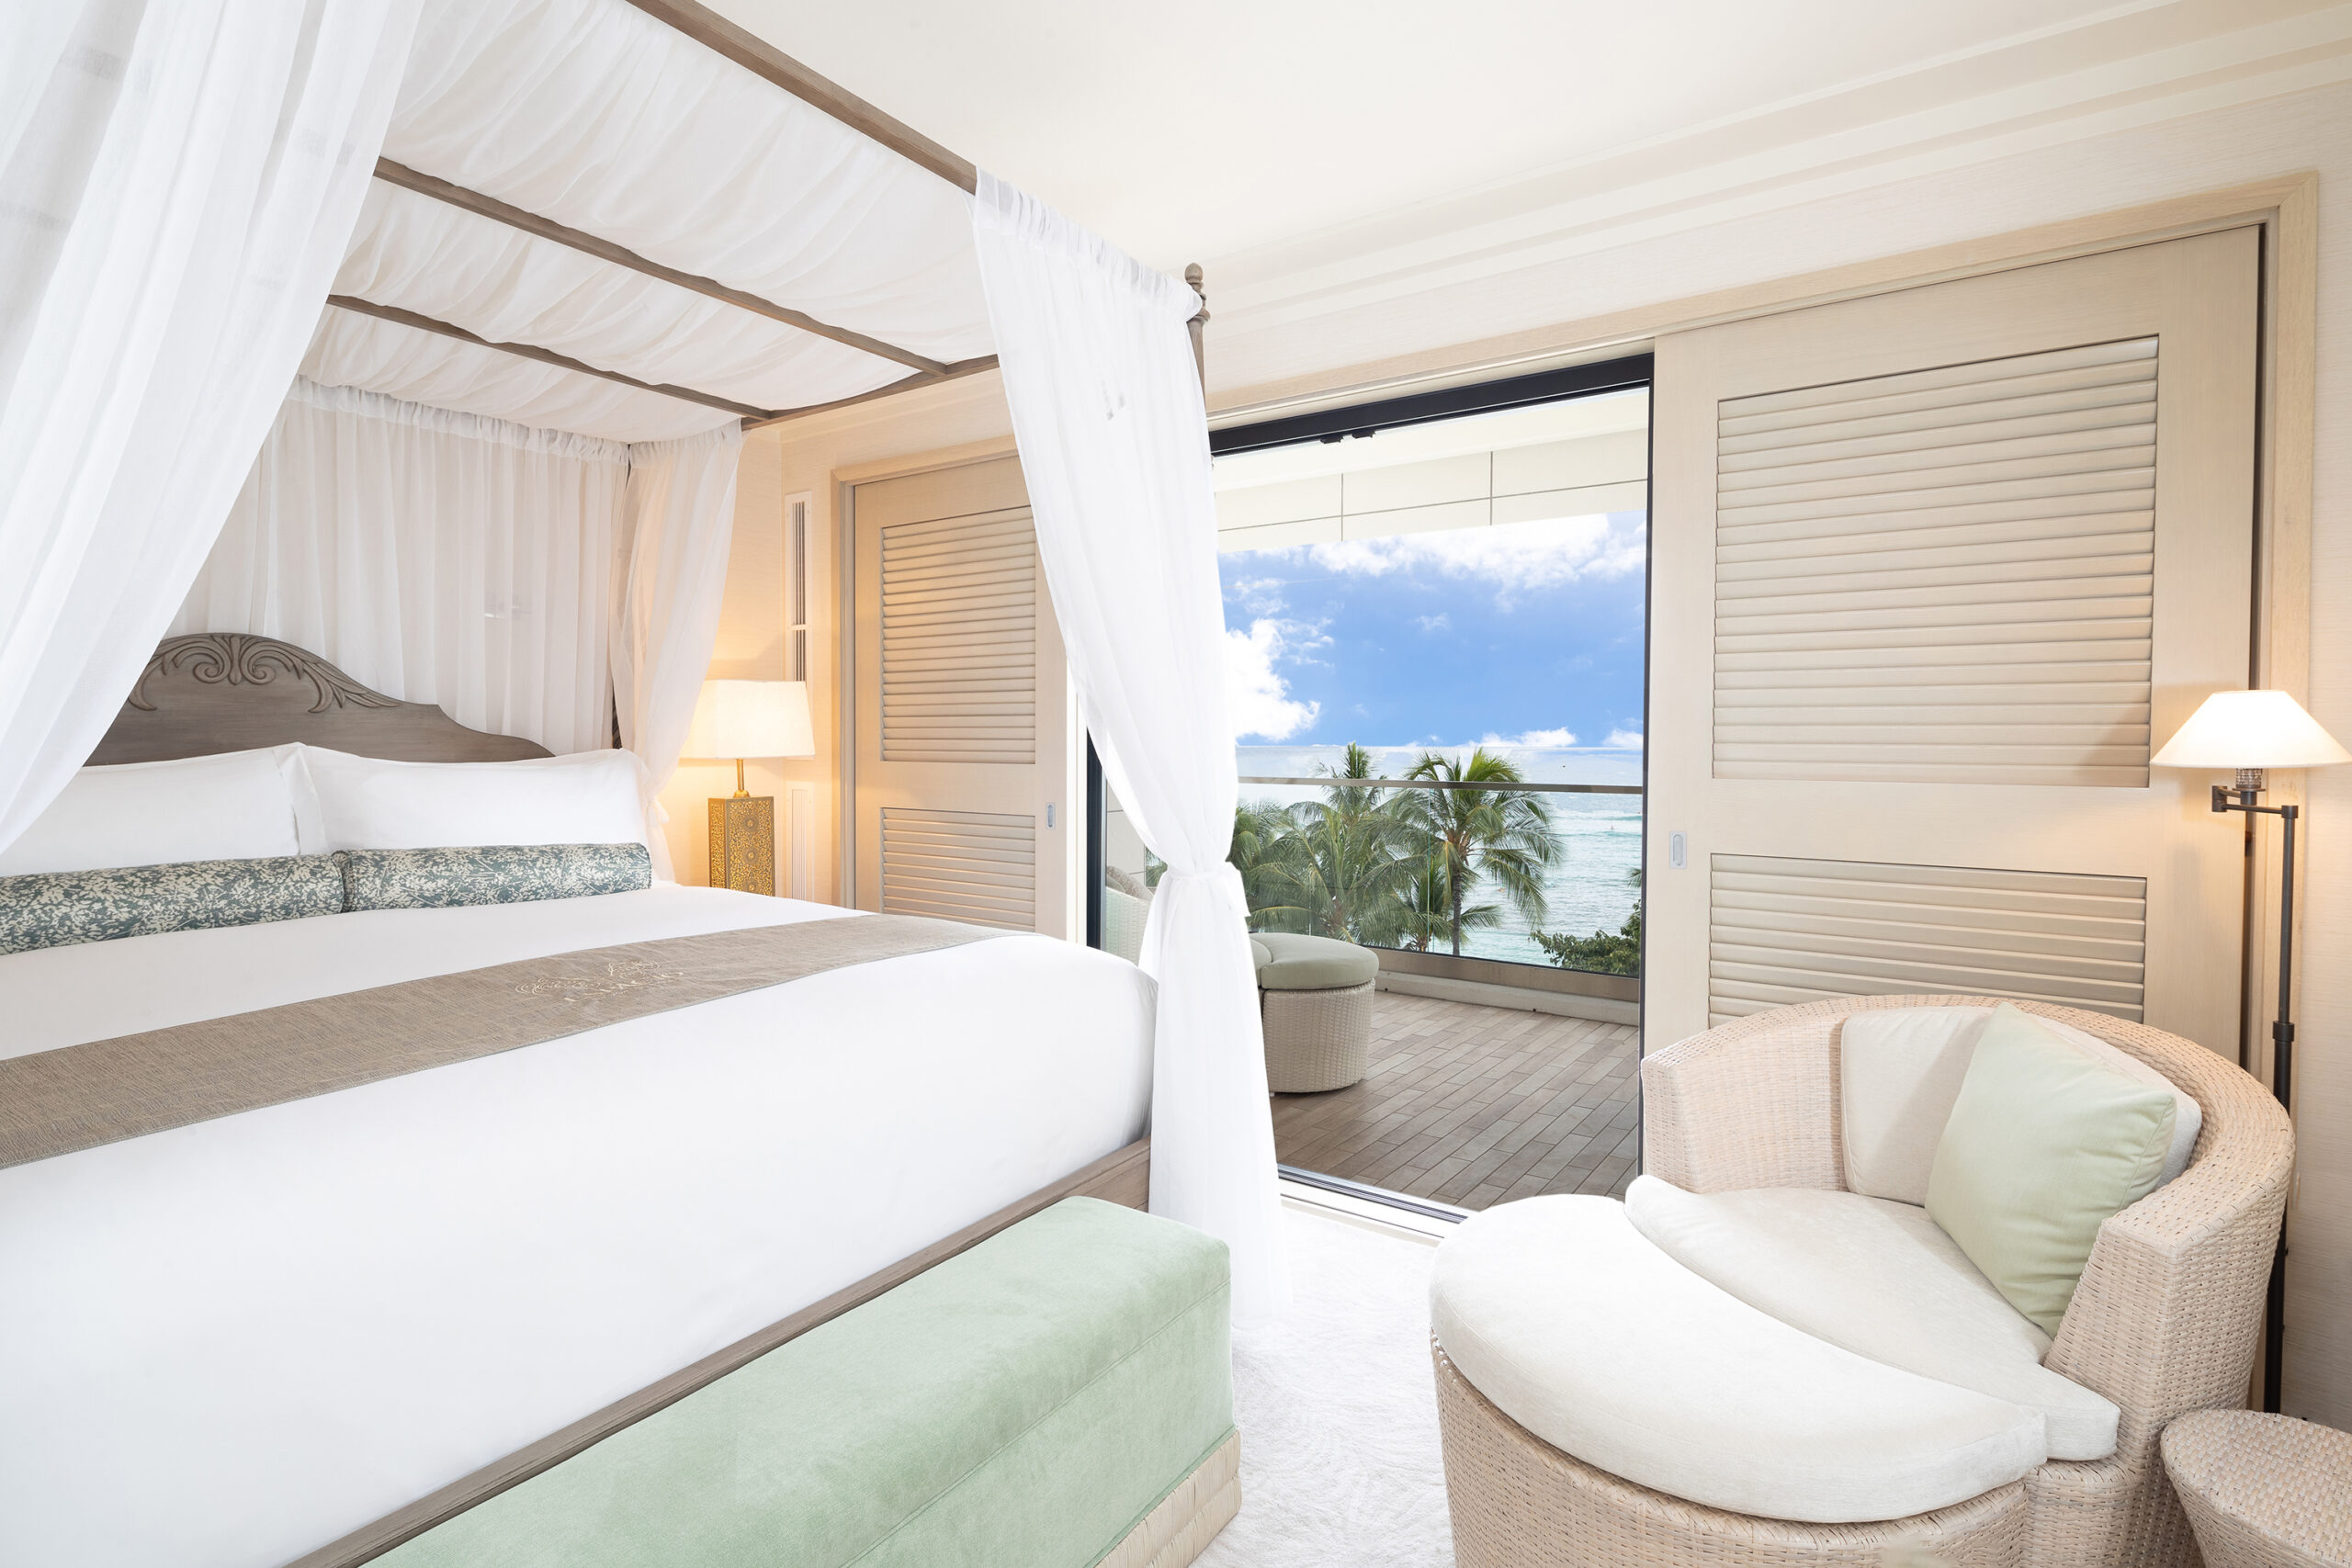 Room with canopy bed, lamps, seating, and balcony with ocean views.